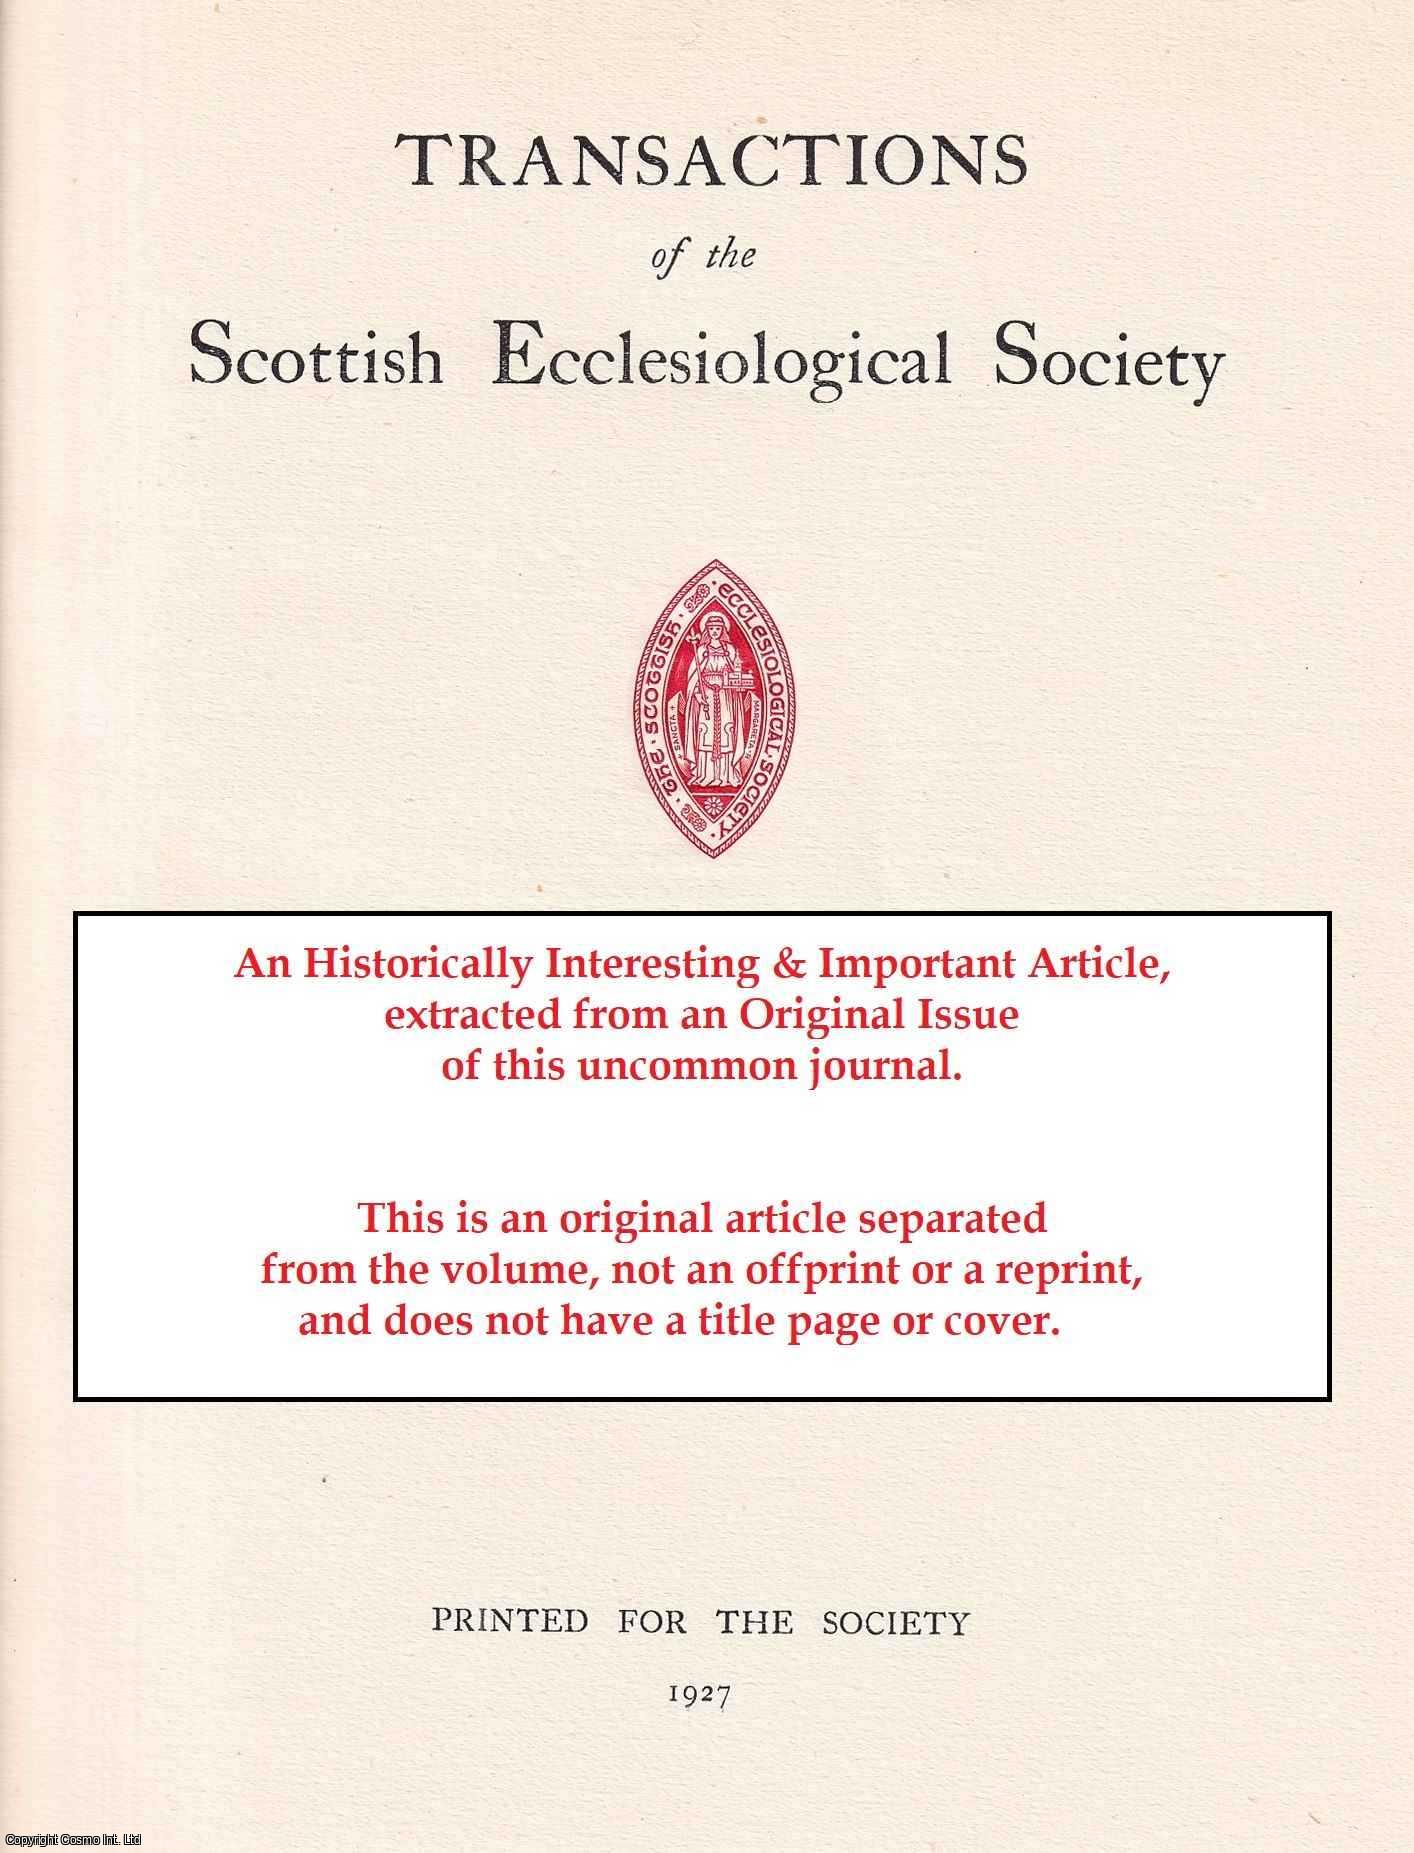 James F. Whyte - The KIrk of Kildrummy, Aberdeenshire. An original article from the Transactions of the Scottish Ecclesiological Society, 1936.